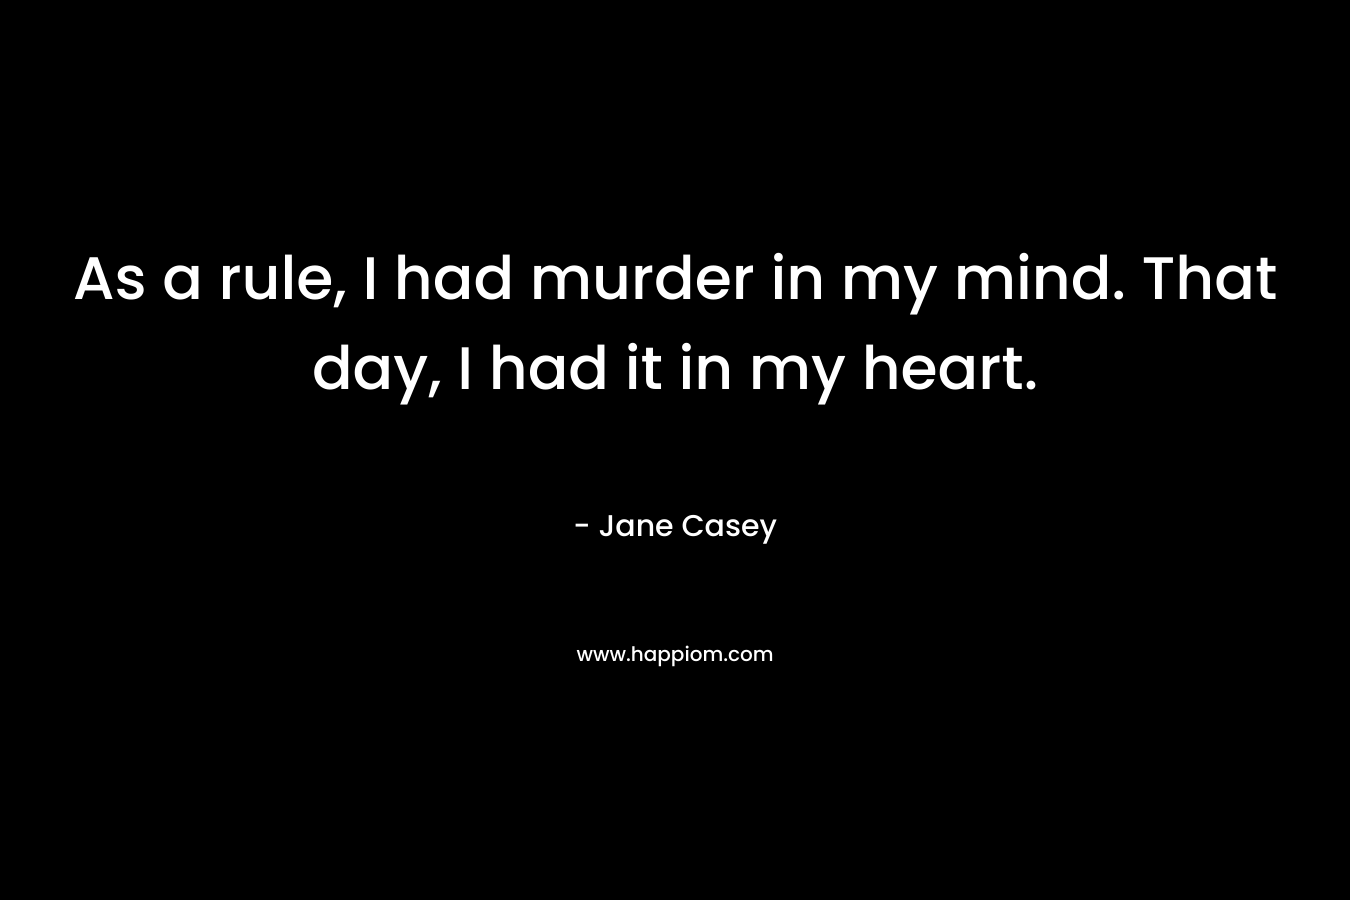 As a rule, I had murder in my mind. That day, I had it in my heart. – Jane Casey